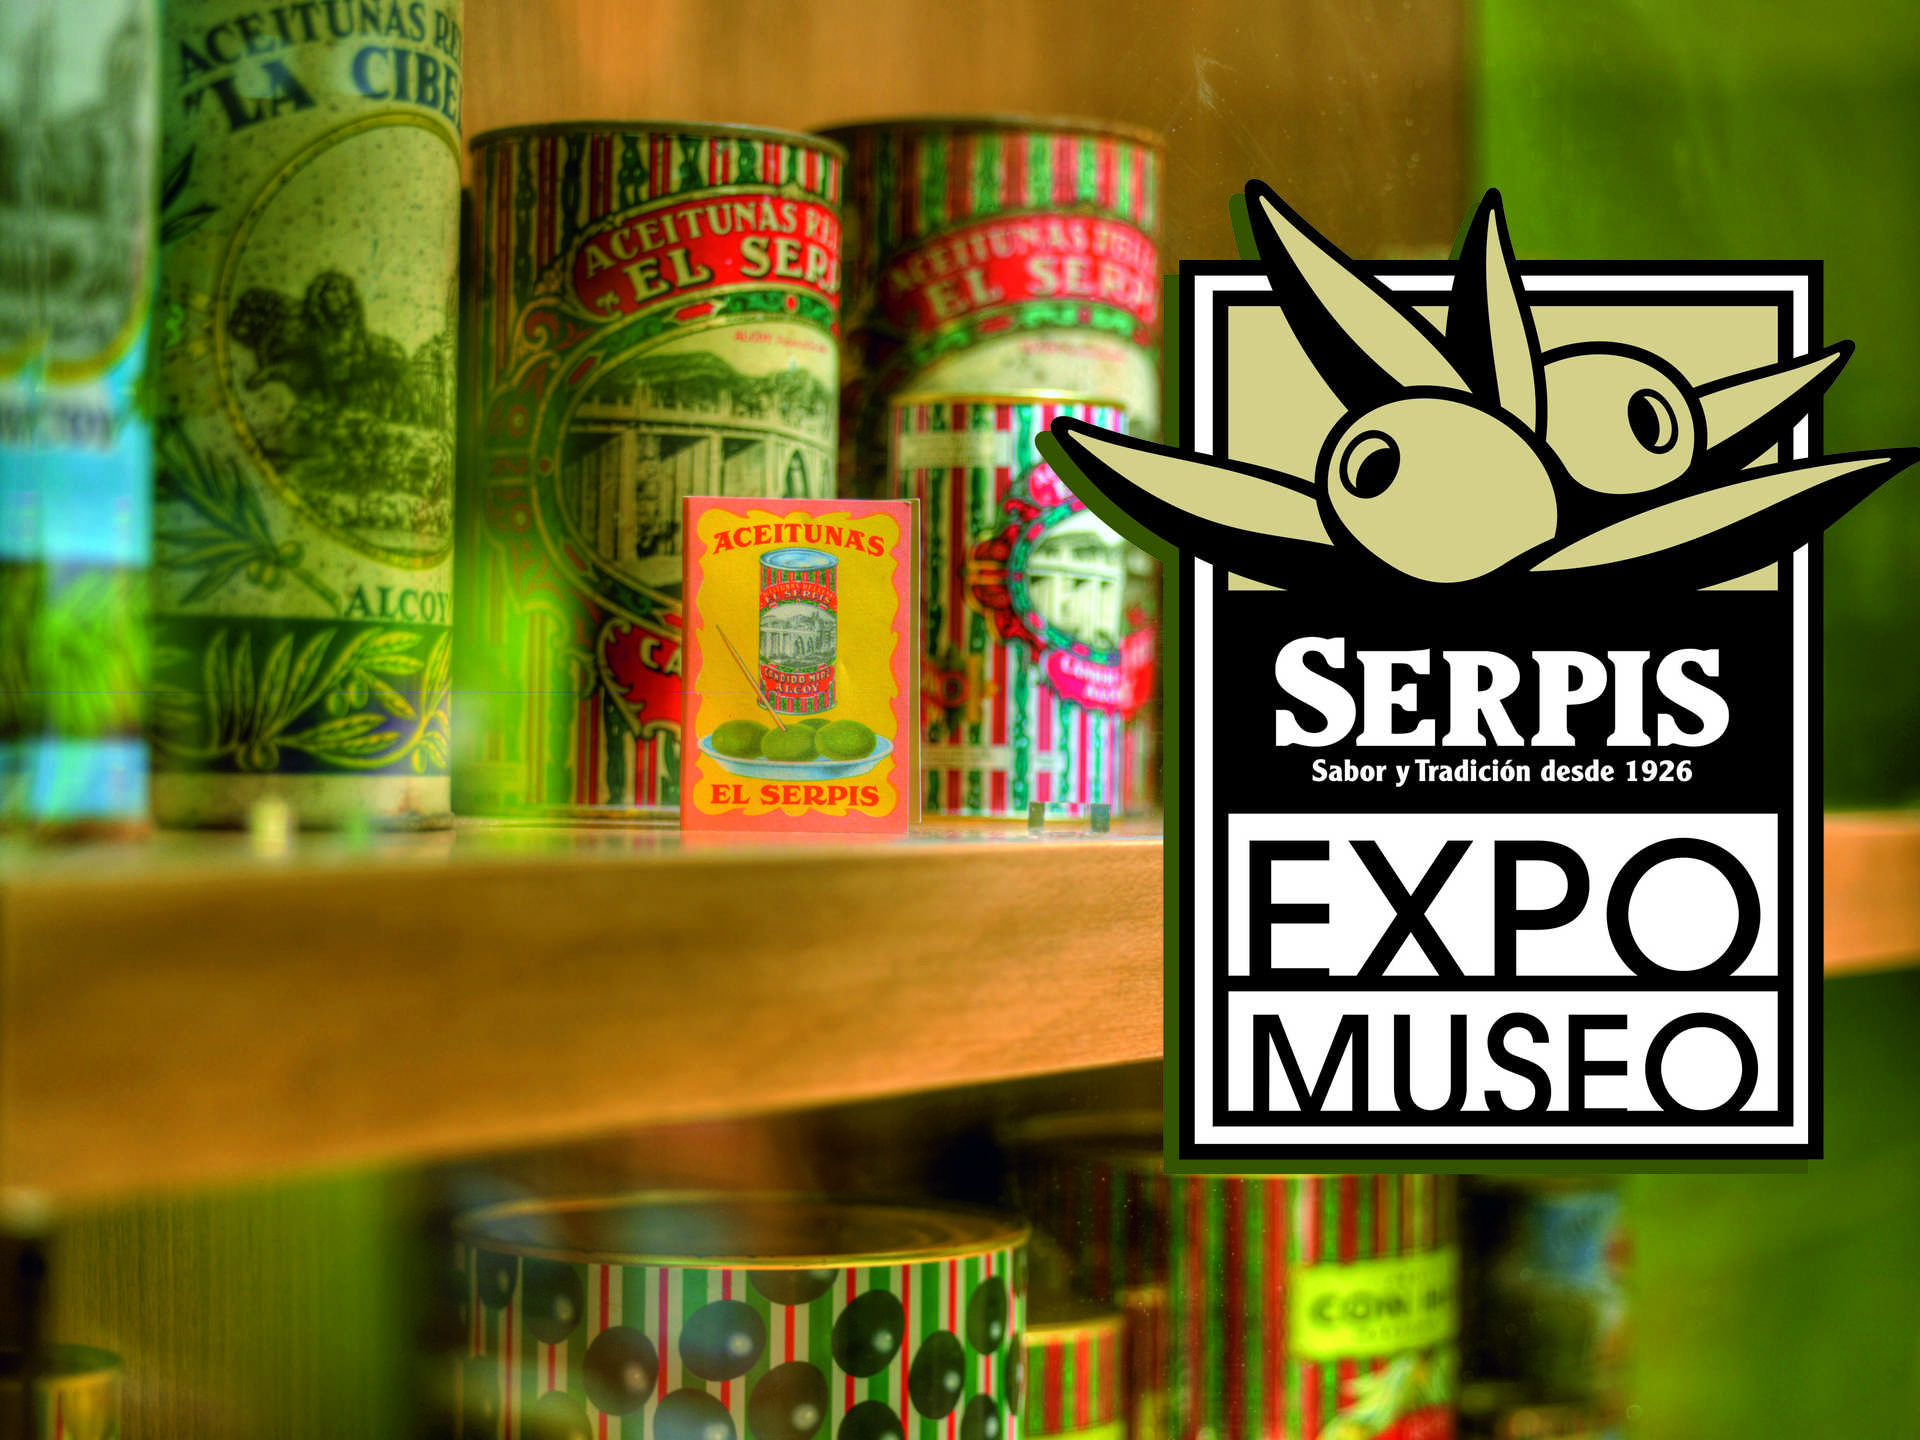 EXPO MUSEO SERPIS